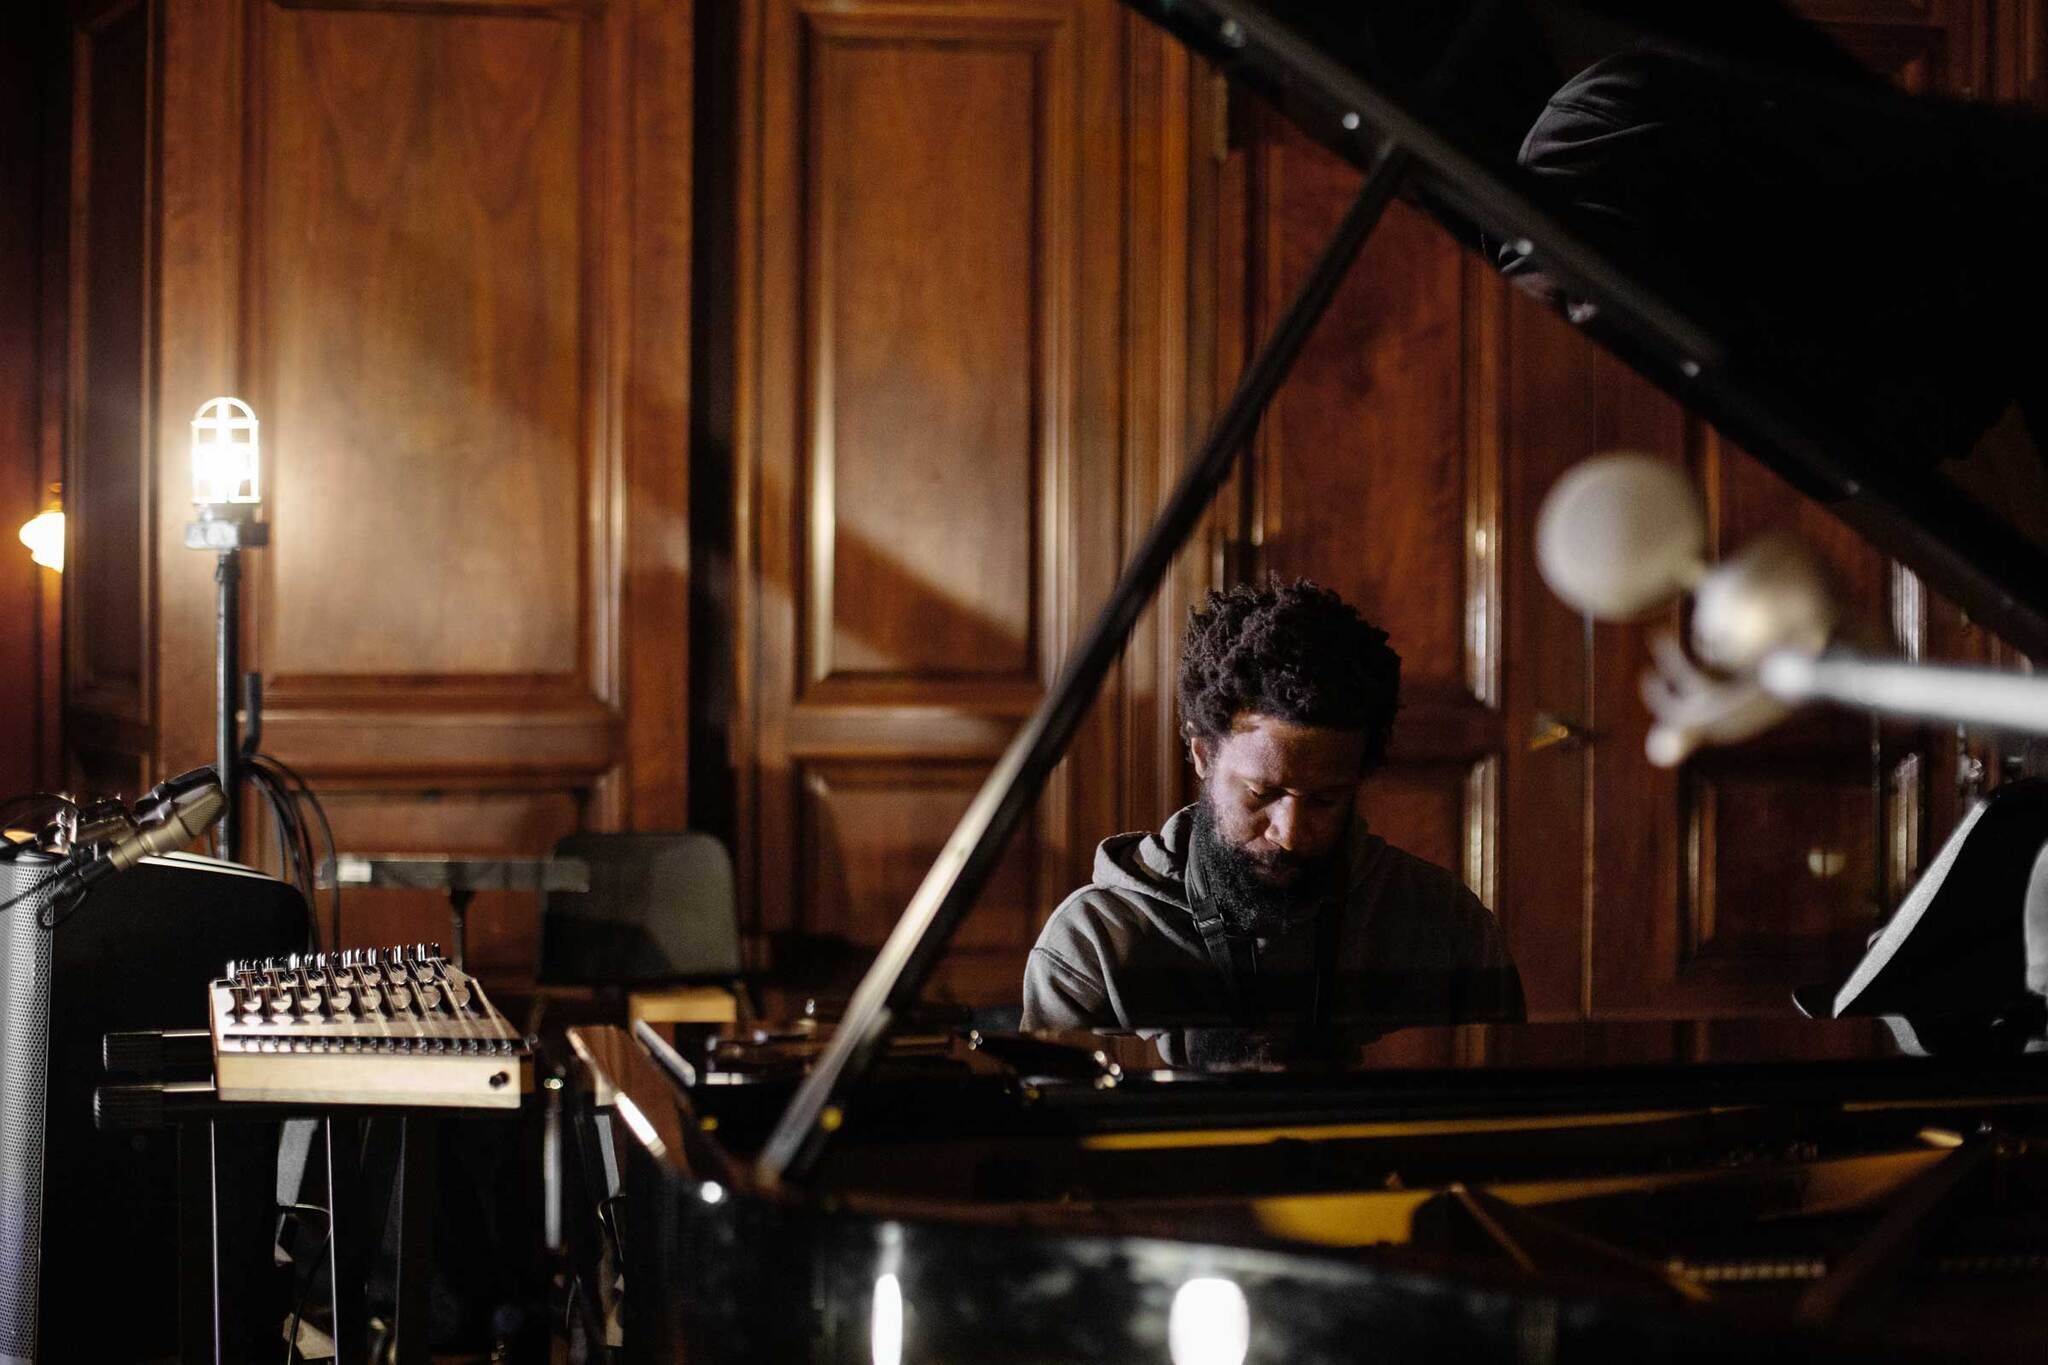 A portrait of JJJJJerome Ellis, a young Black person with short black hair and a black beard. Ellis sits at a grand piano in a room with dark wooden walls surrounded by musical instruments. 